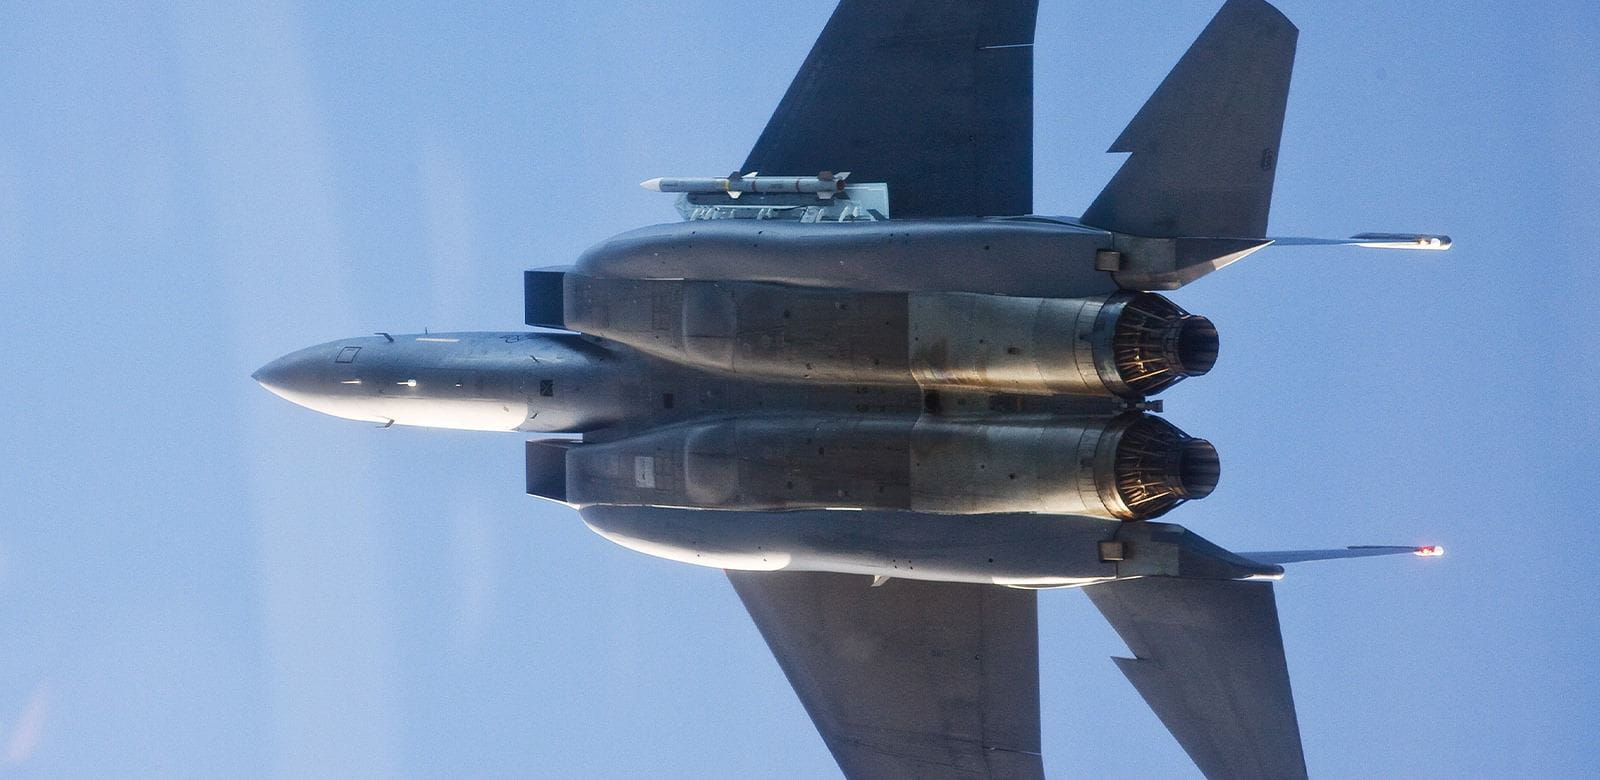 The AMRAAM missile has demonstrated superb effectiveness in both air-to-air and surface-launch scenarios.